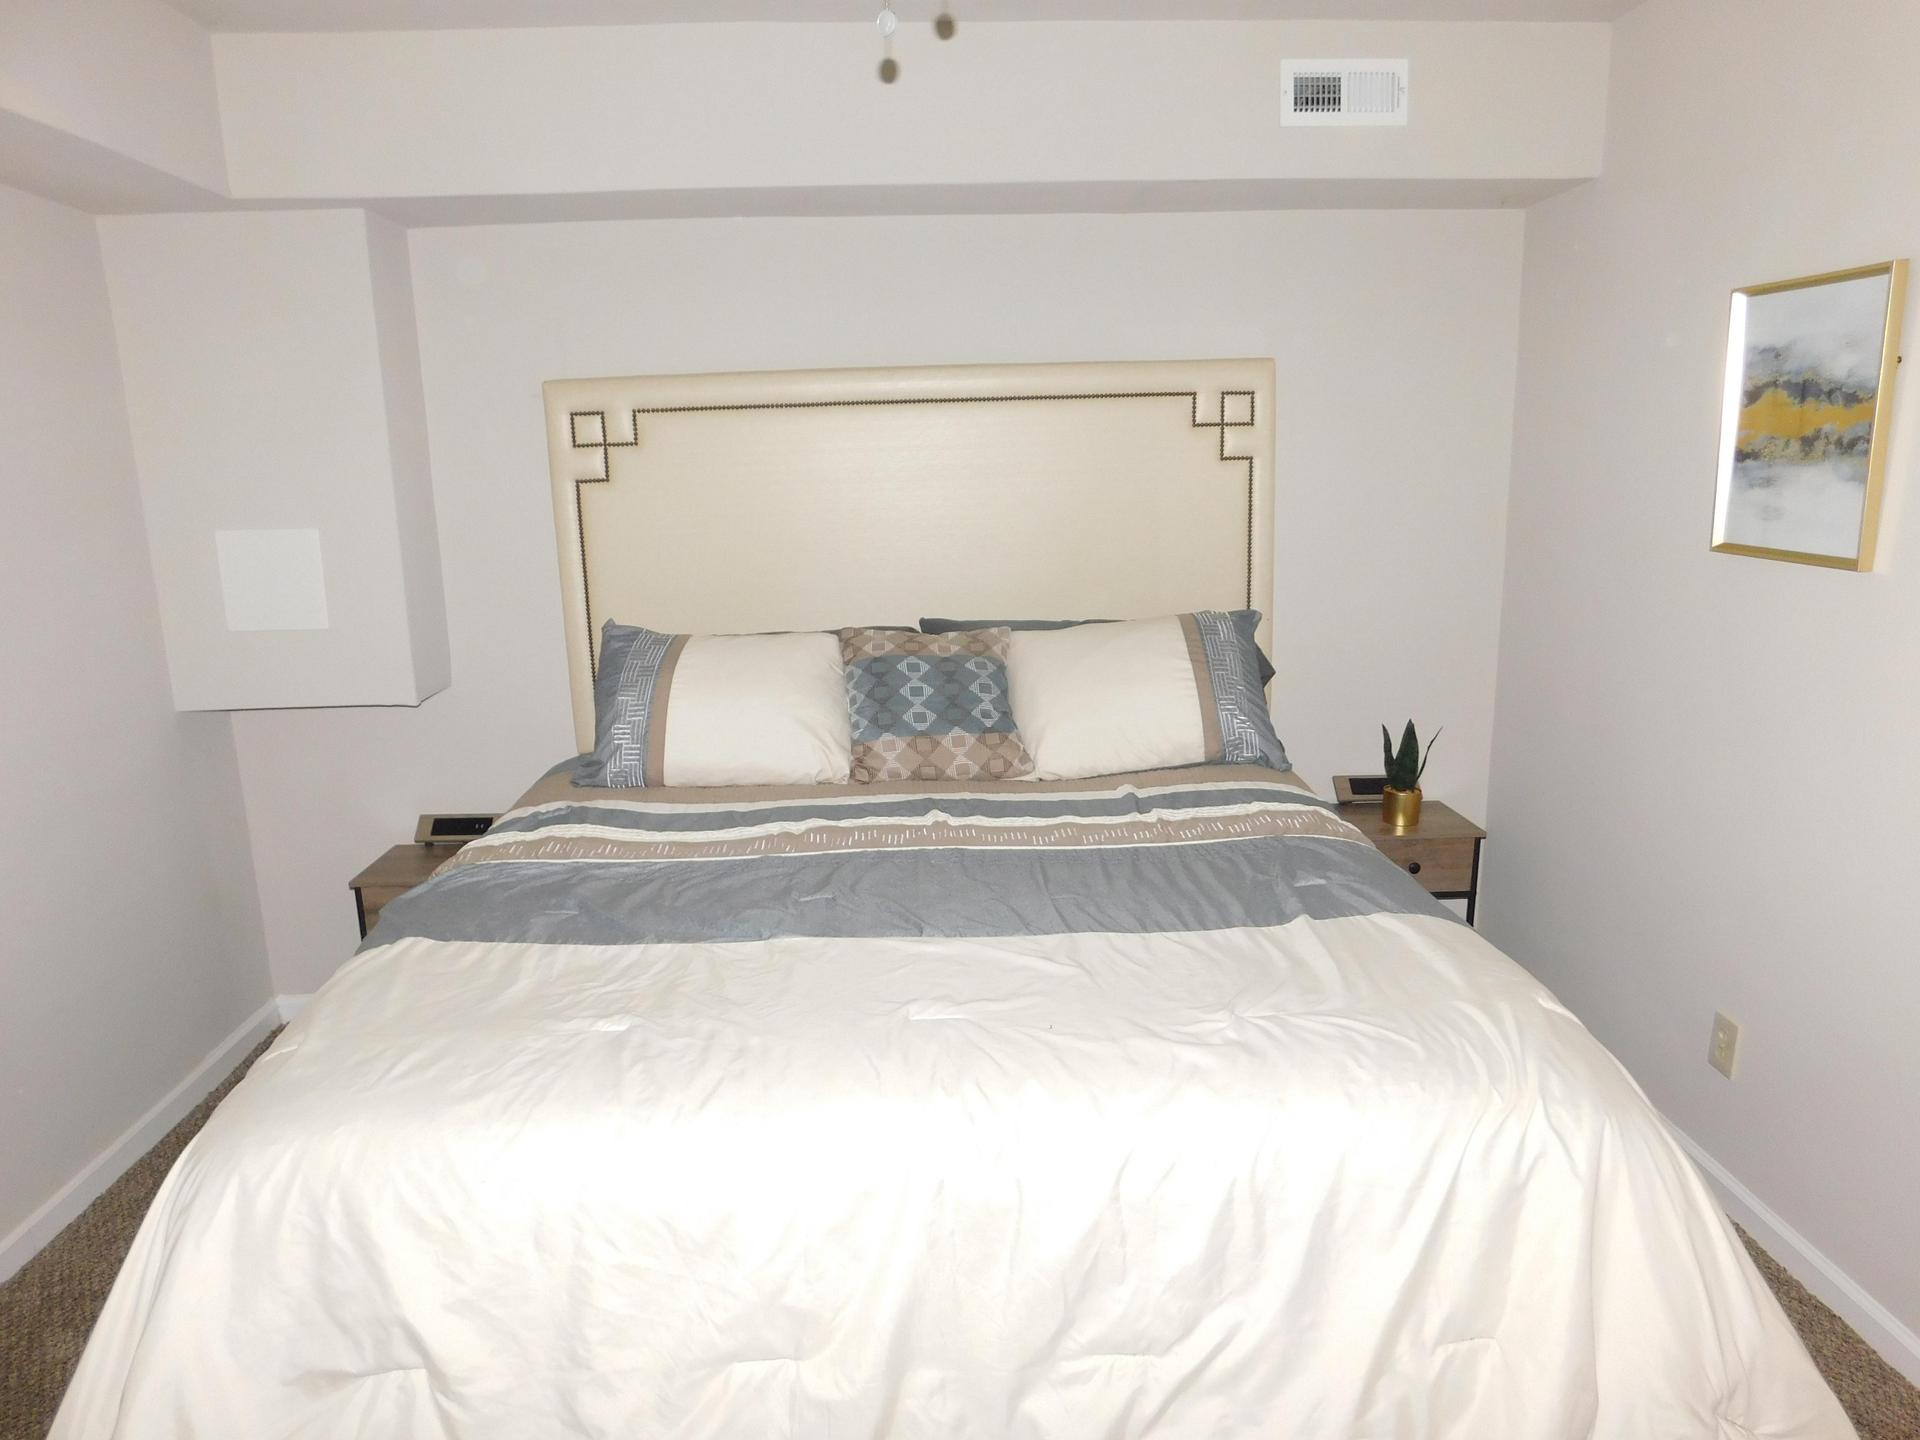 Bedroom 4: Front view of KING size bed